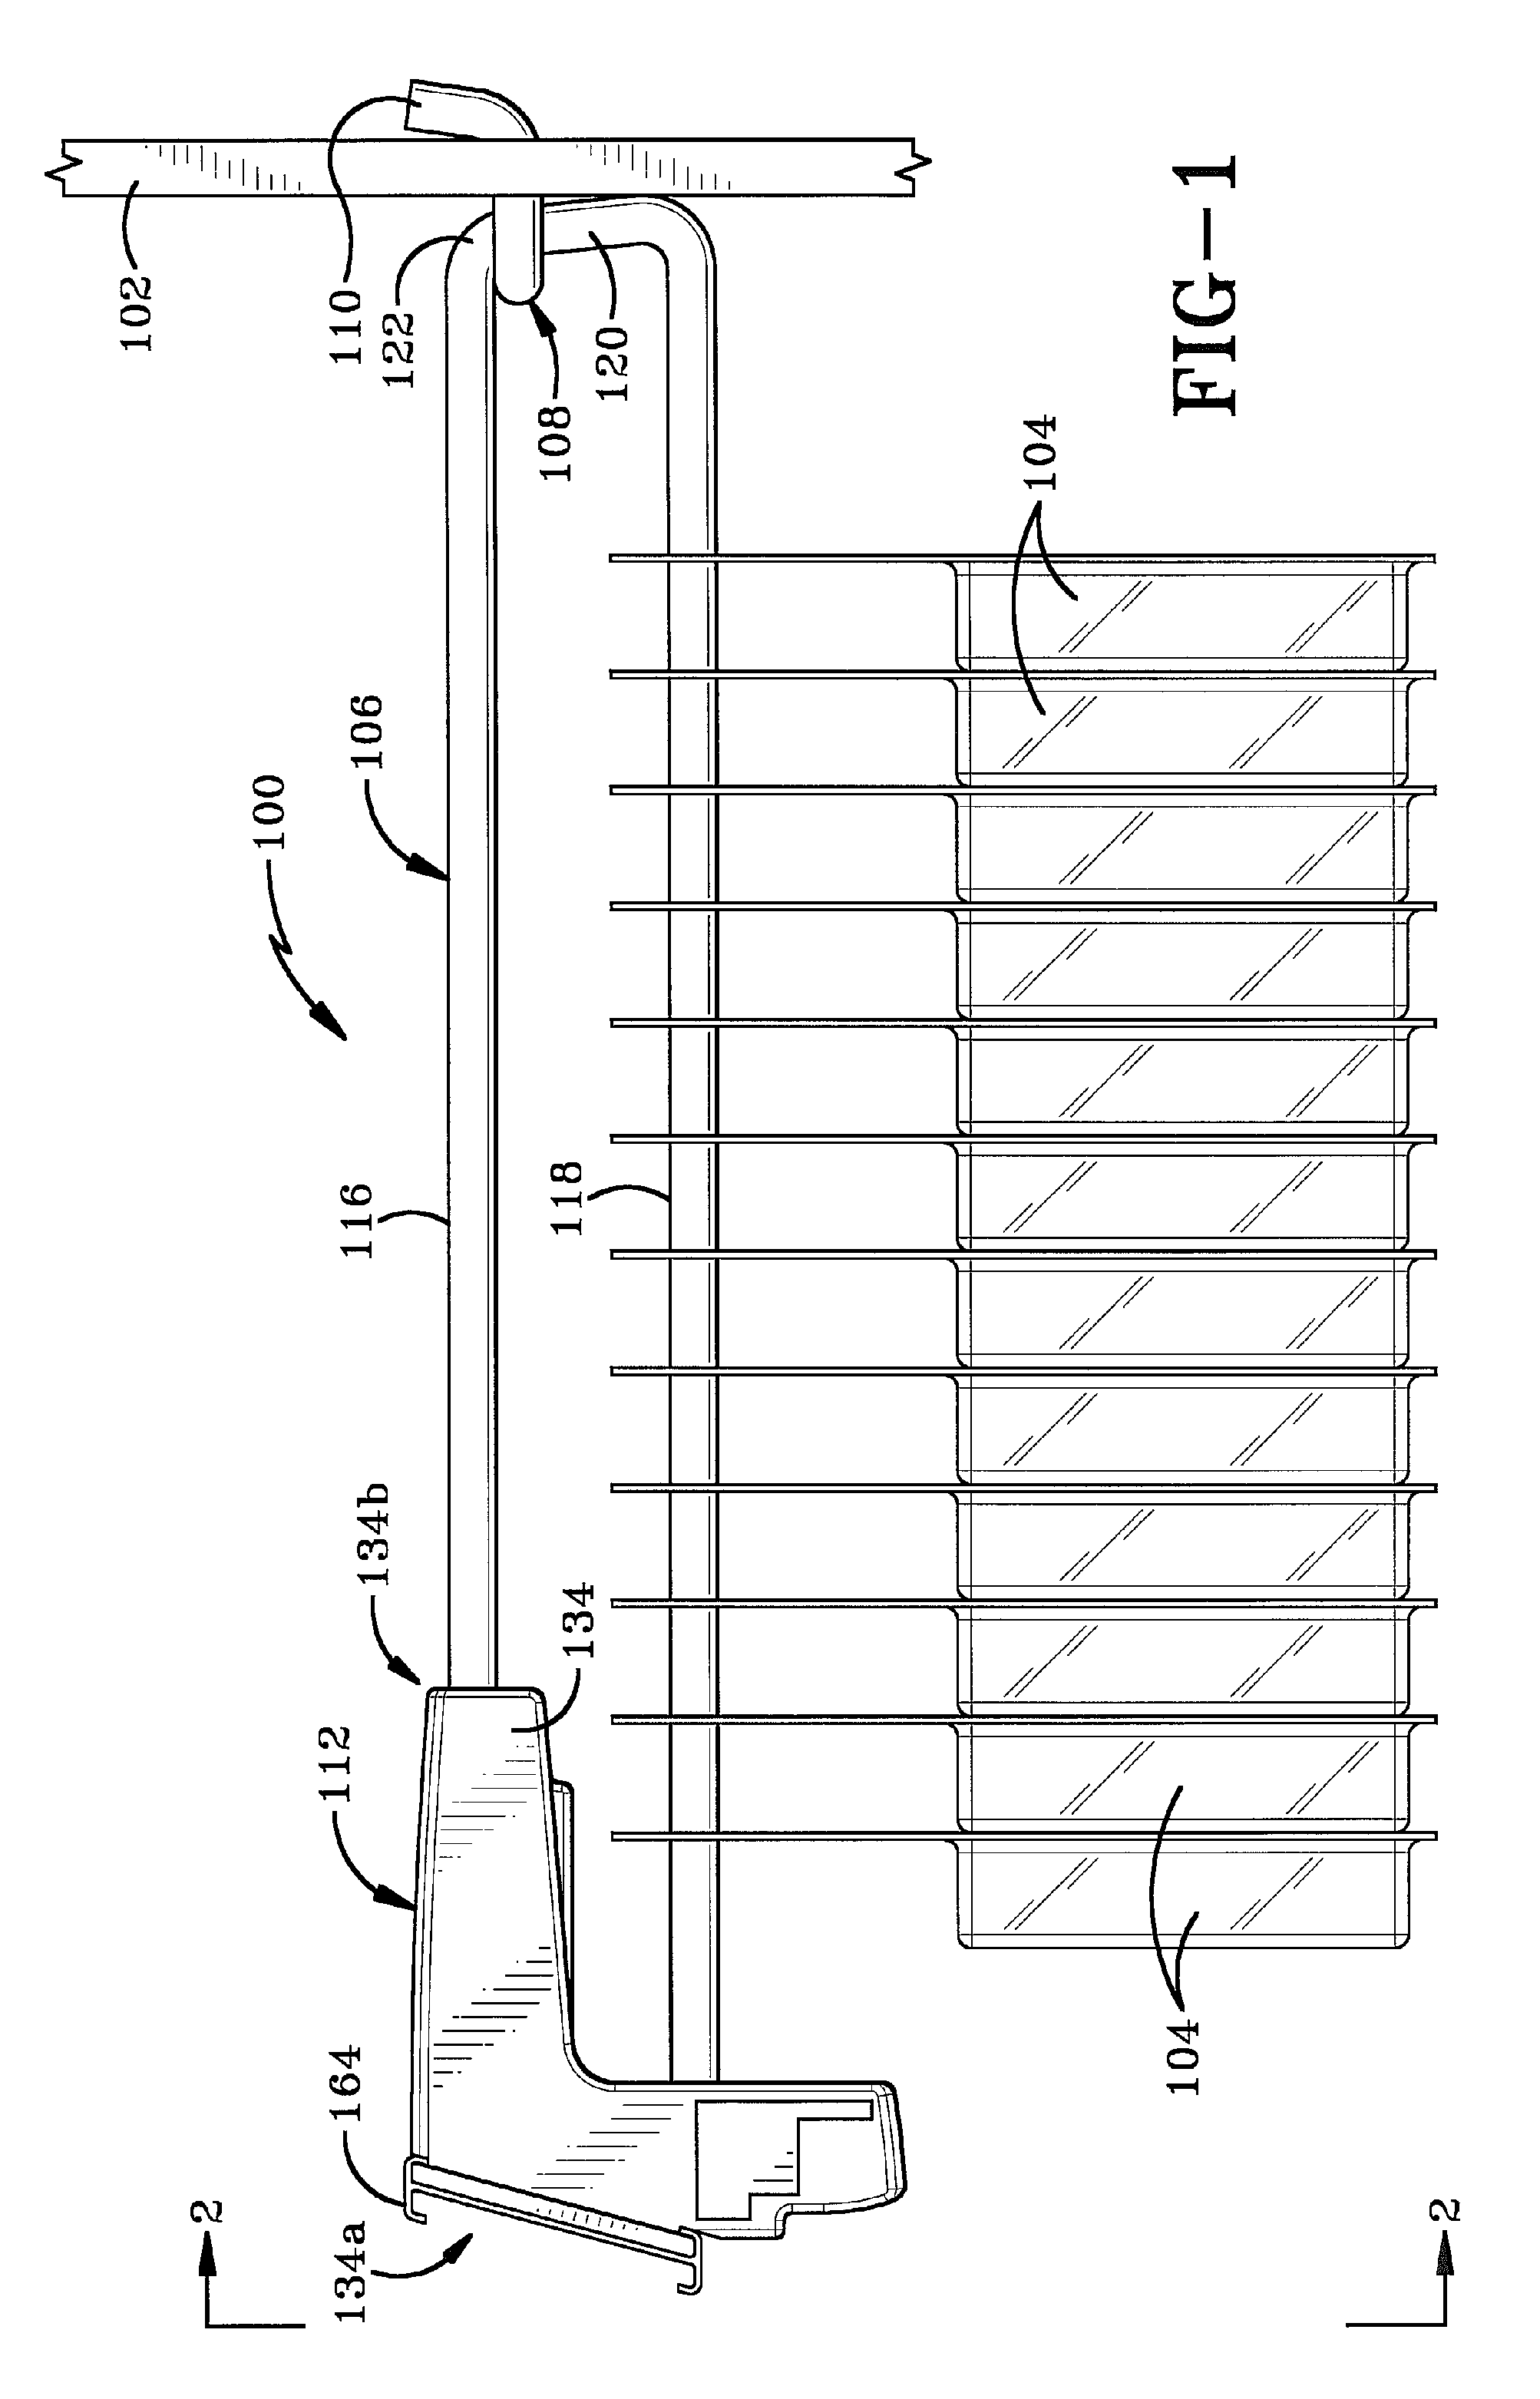 Display hook assembly having a secure free end